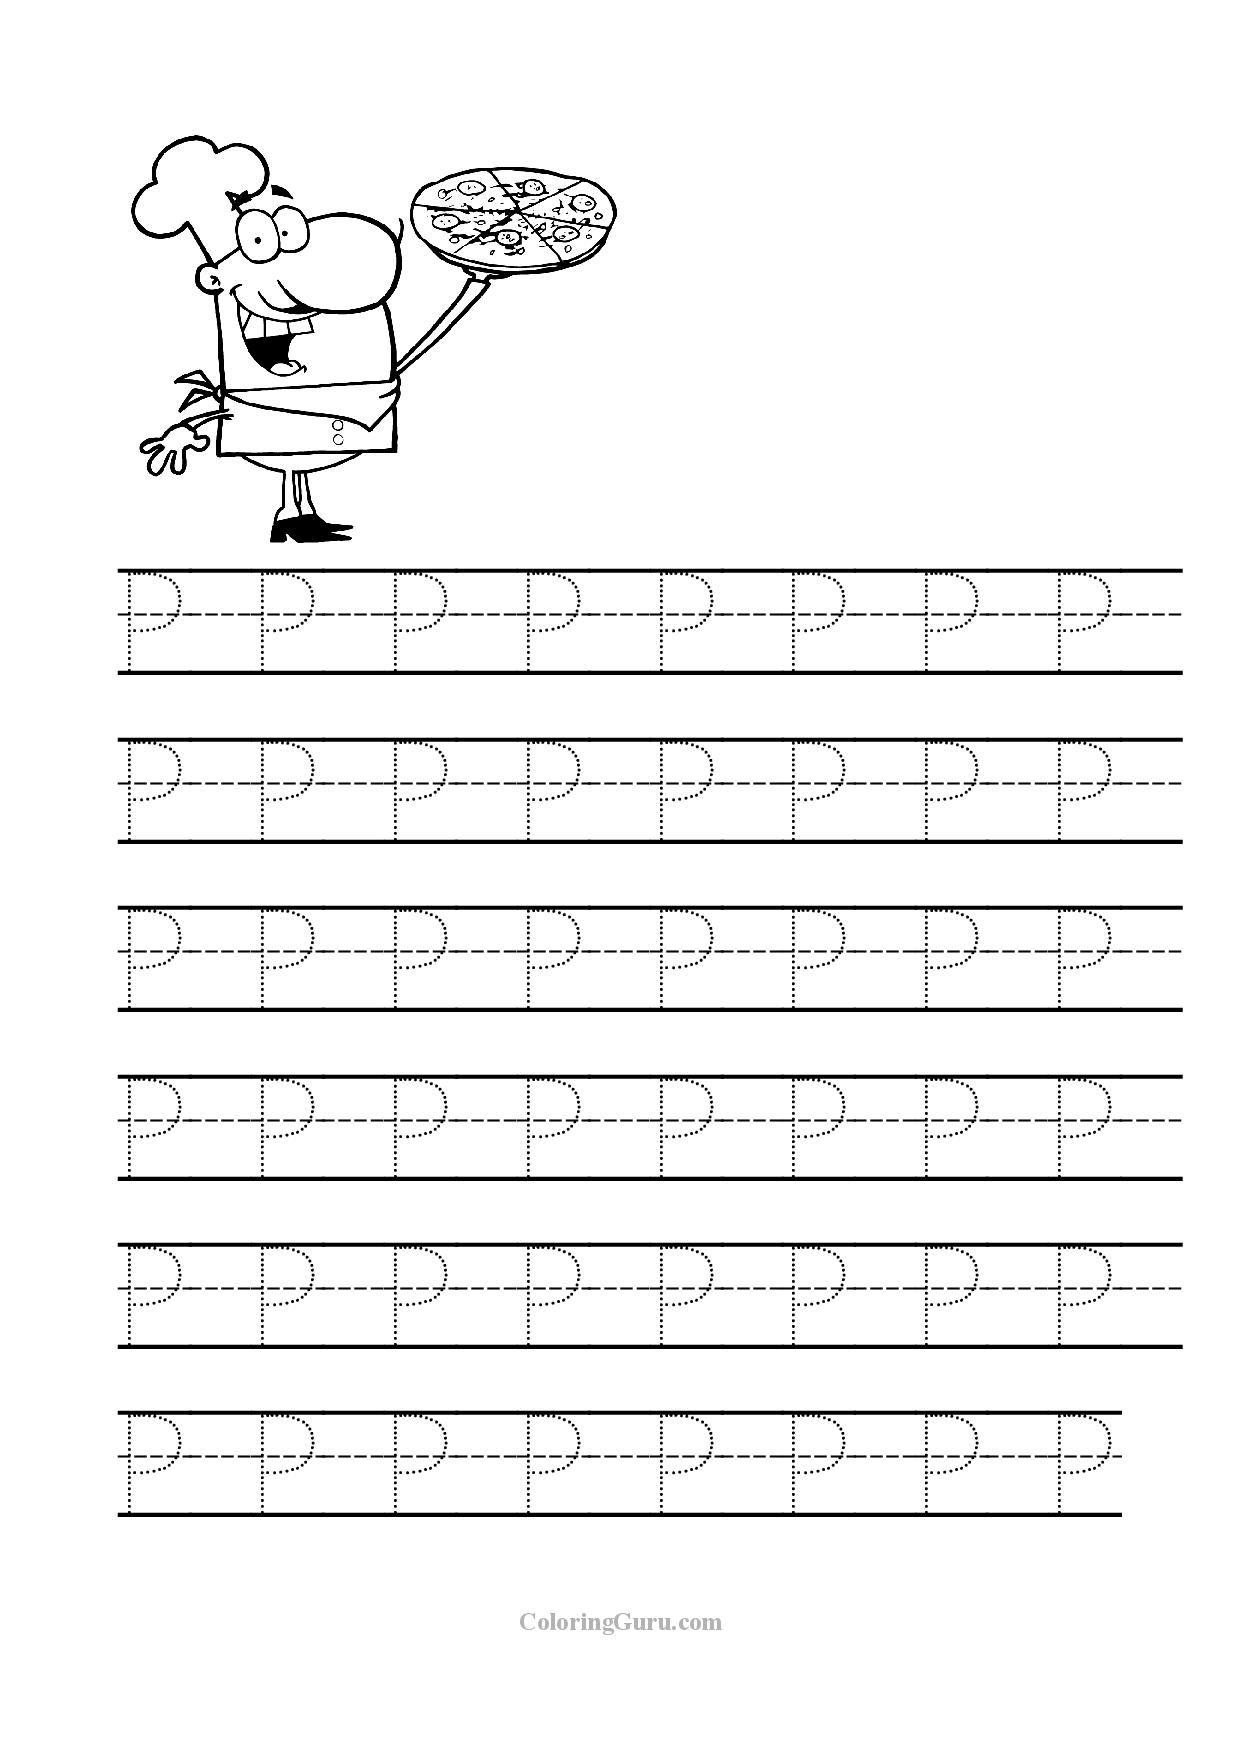 Free Printable Tracing Letter P Worksheets For Preschool regarding Letter P Tracing For Preschool